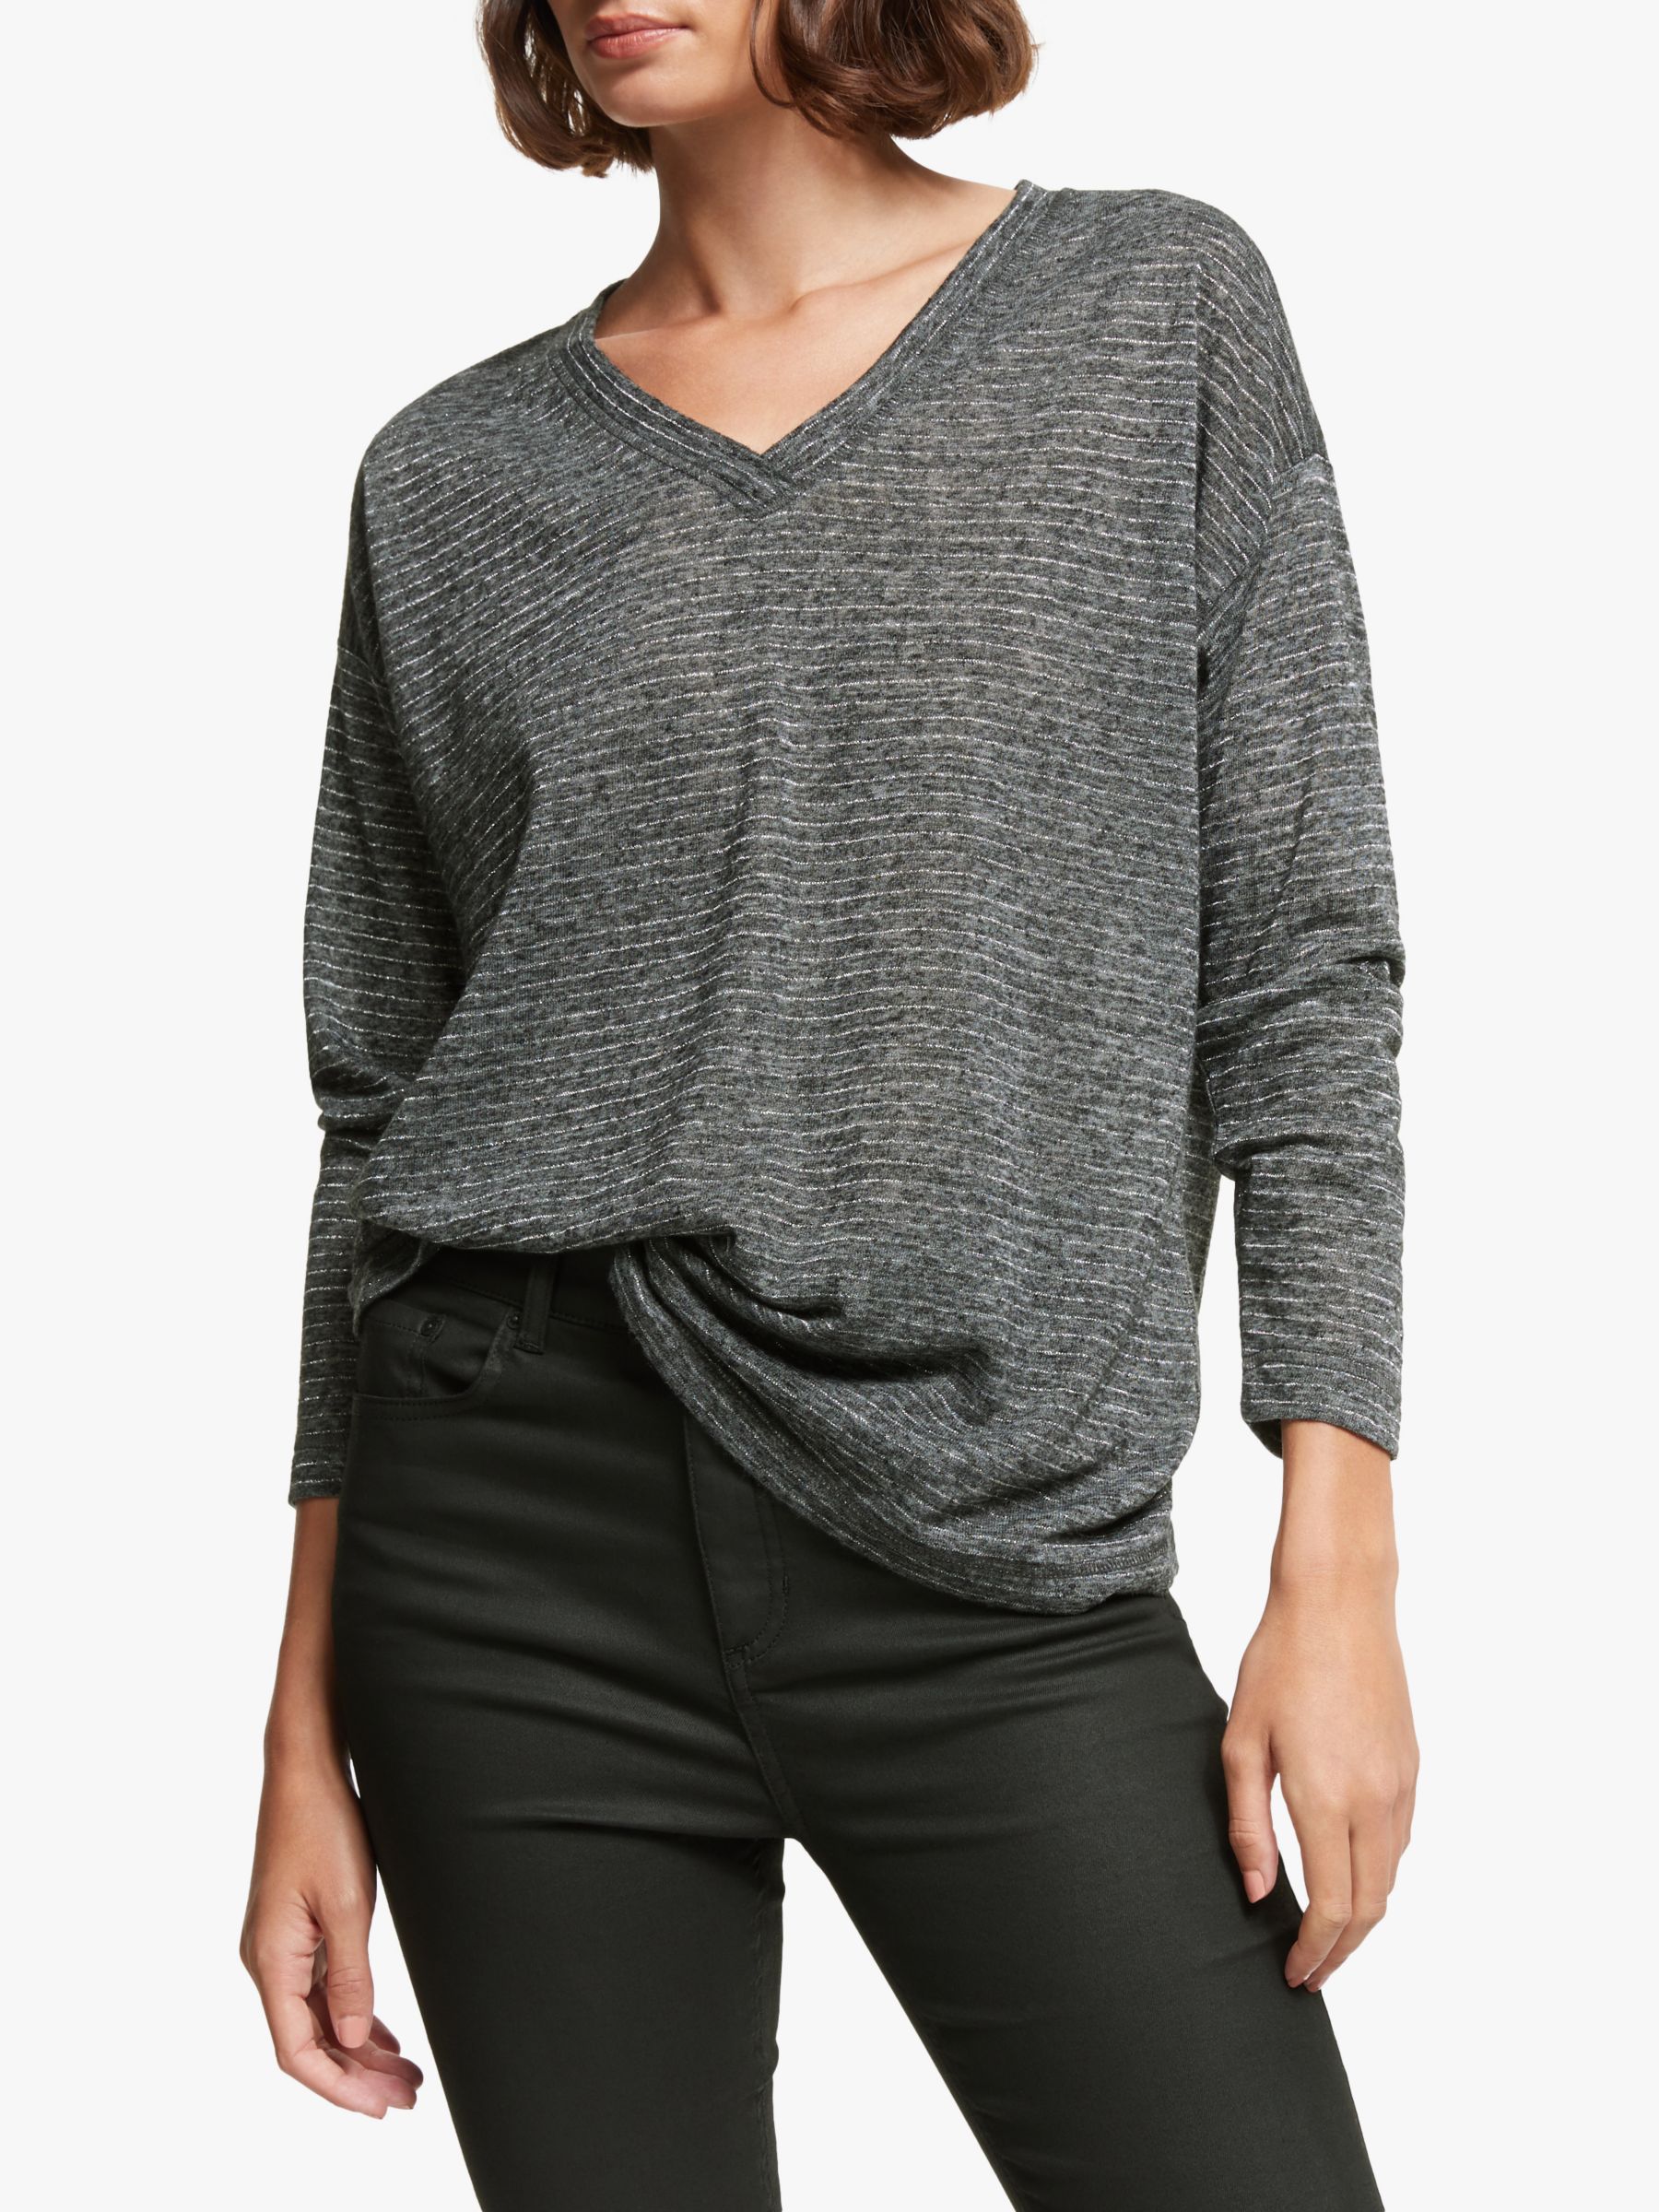 AND/OR Daria Dolman Stripe Top, Charcoal/Silver at John Lewis & Partners